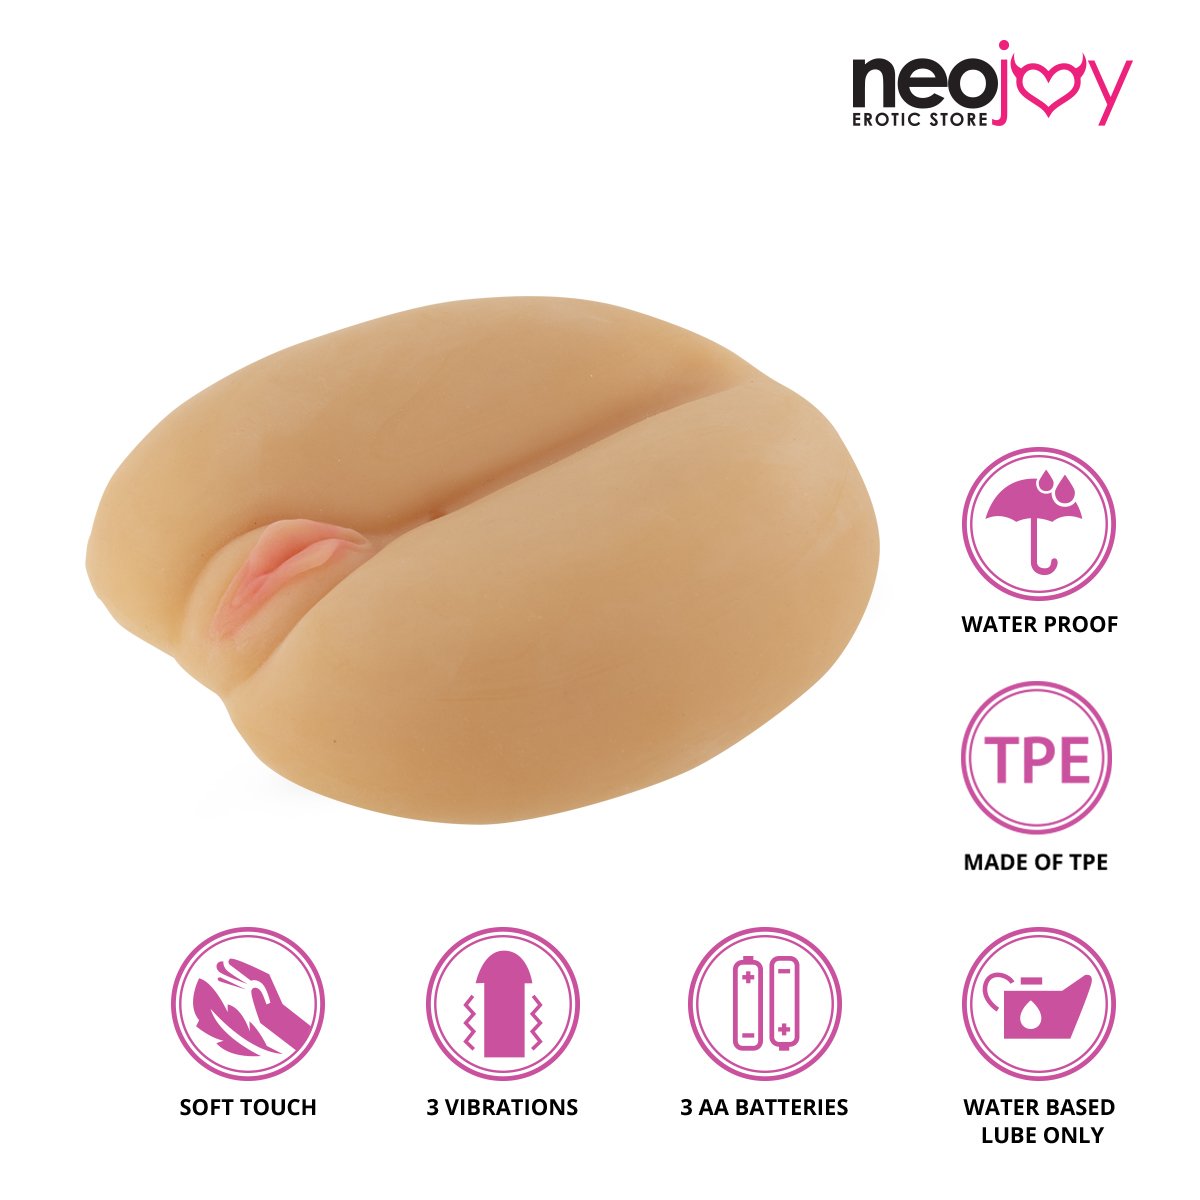 Neojoy Vibrating Male Strokers Sex Doll TPE Realistic Vagina & Ass - Small 1.9kg